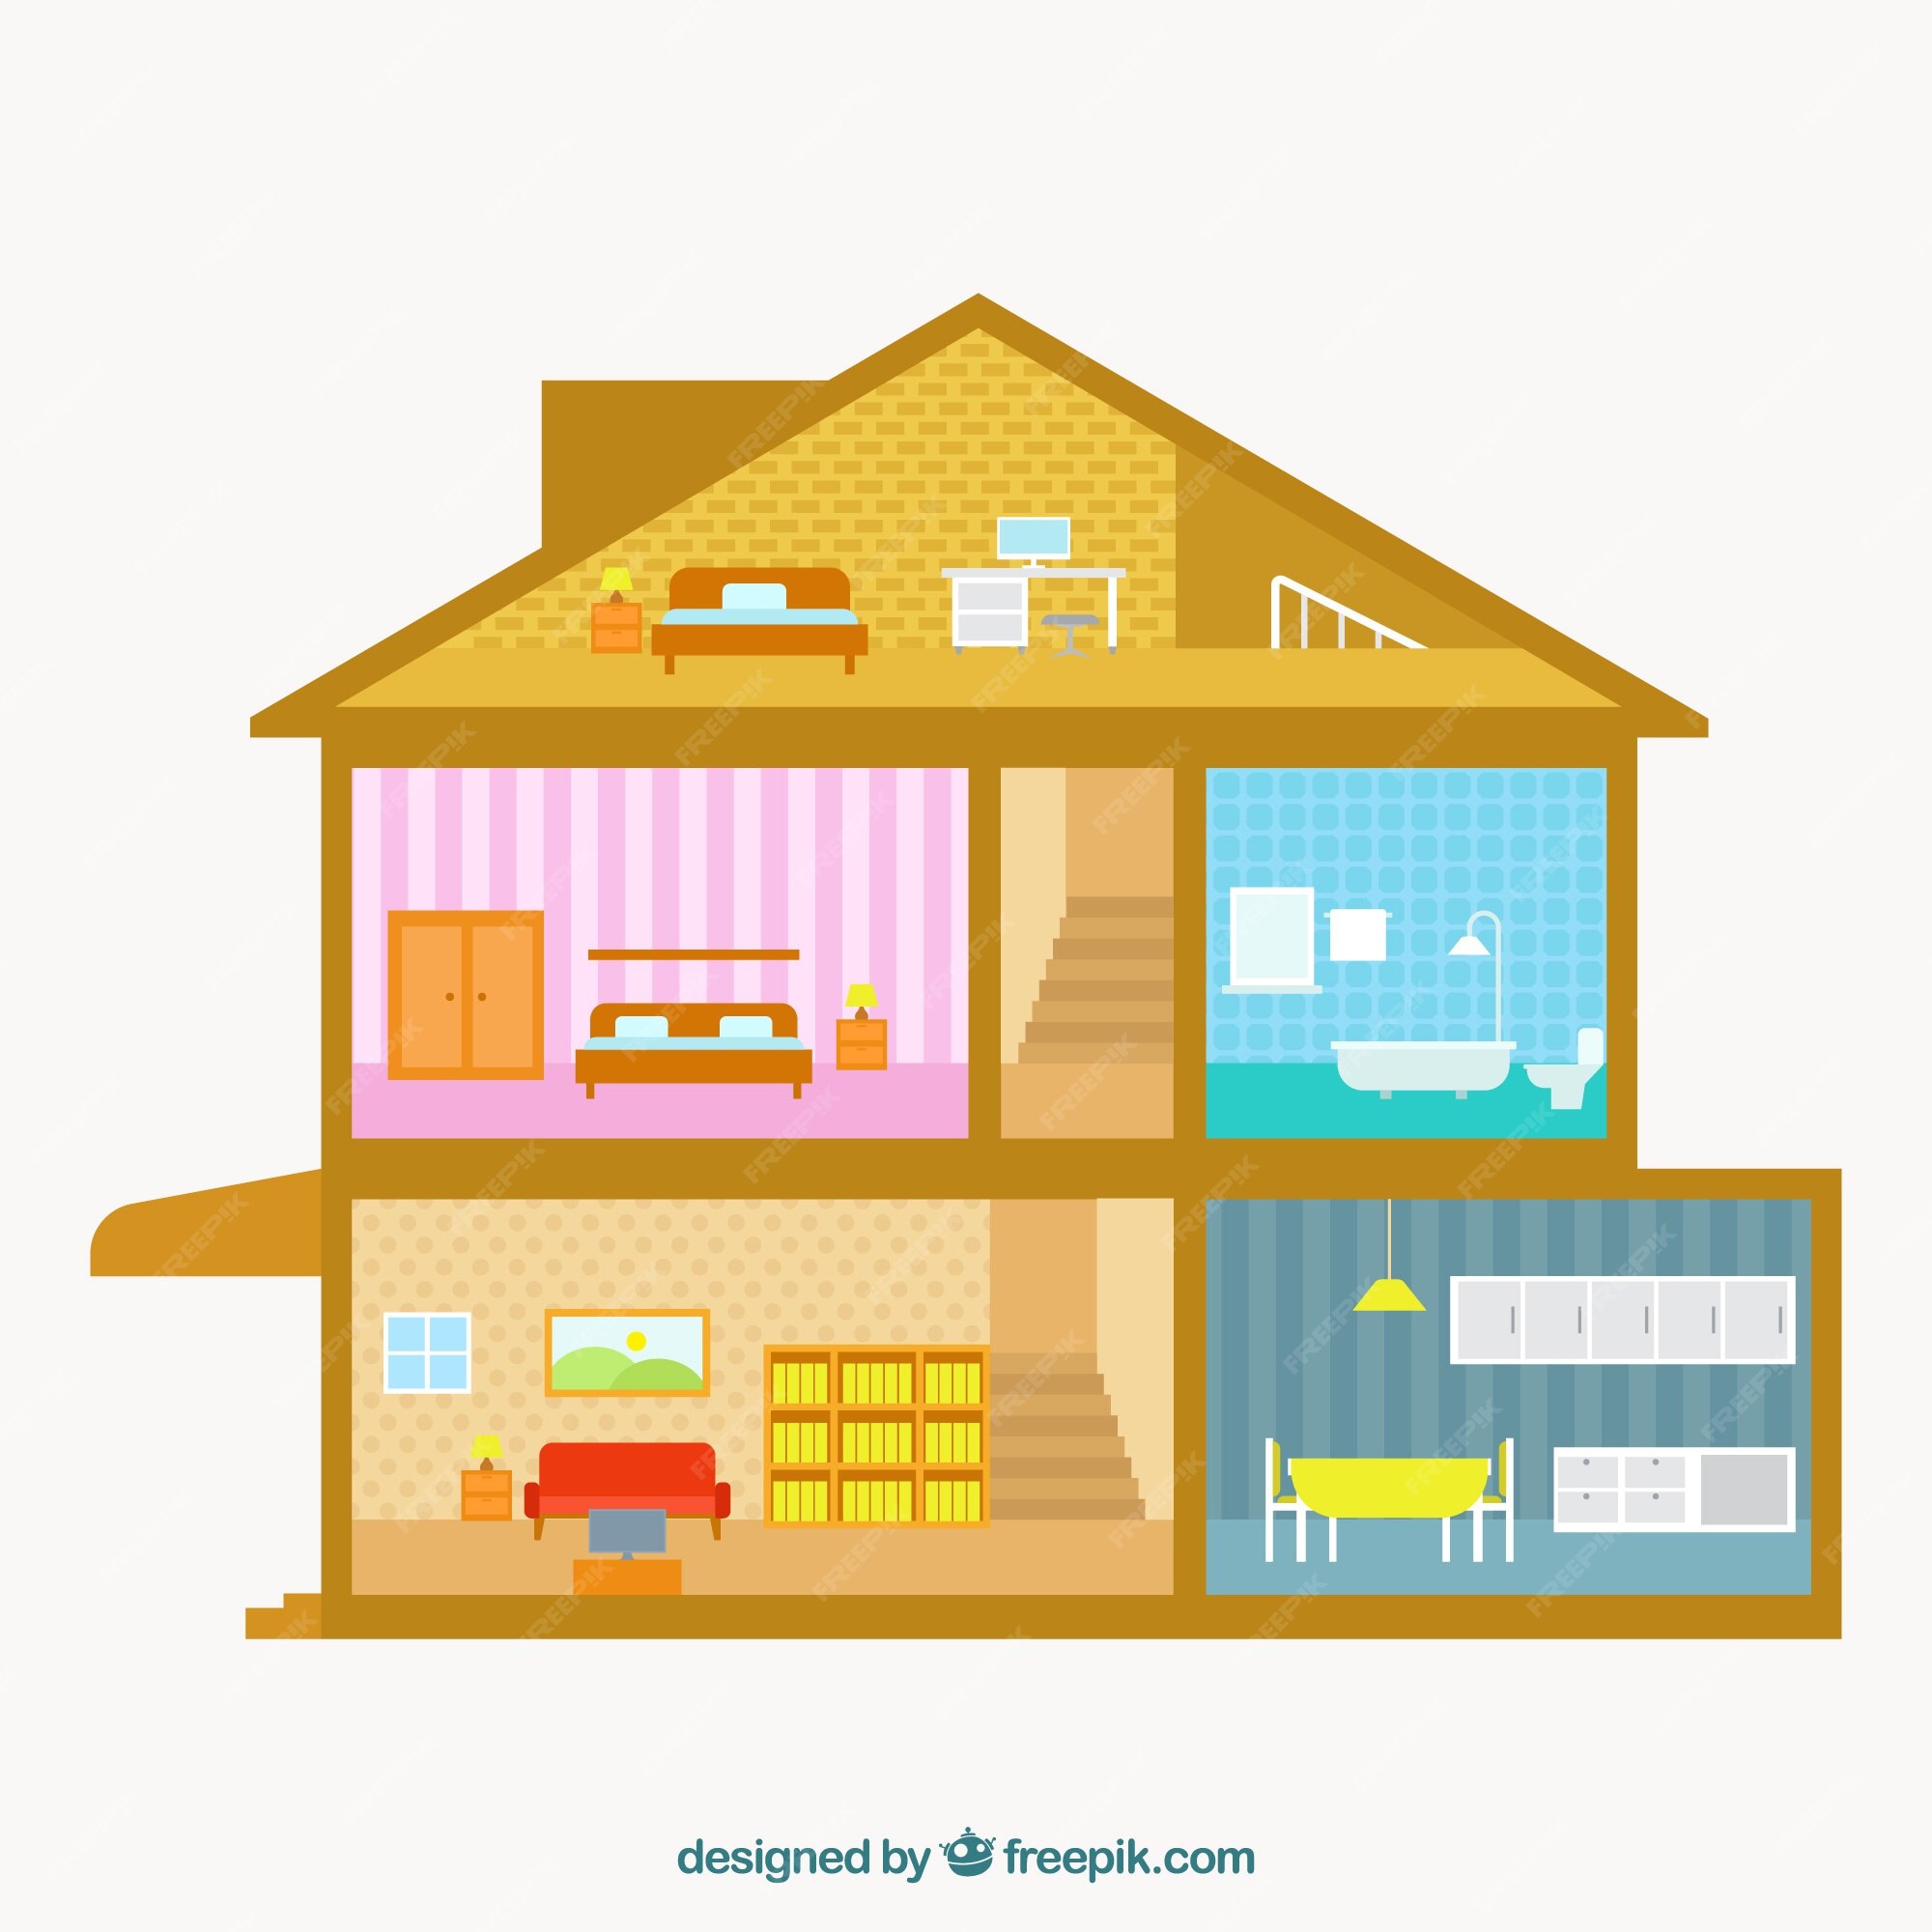 All Rooms House Rooms Homes Vector Stock Vector (Royalty Free) 170512370